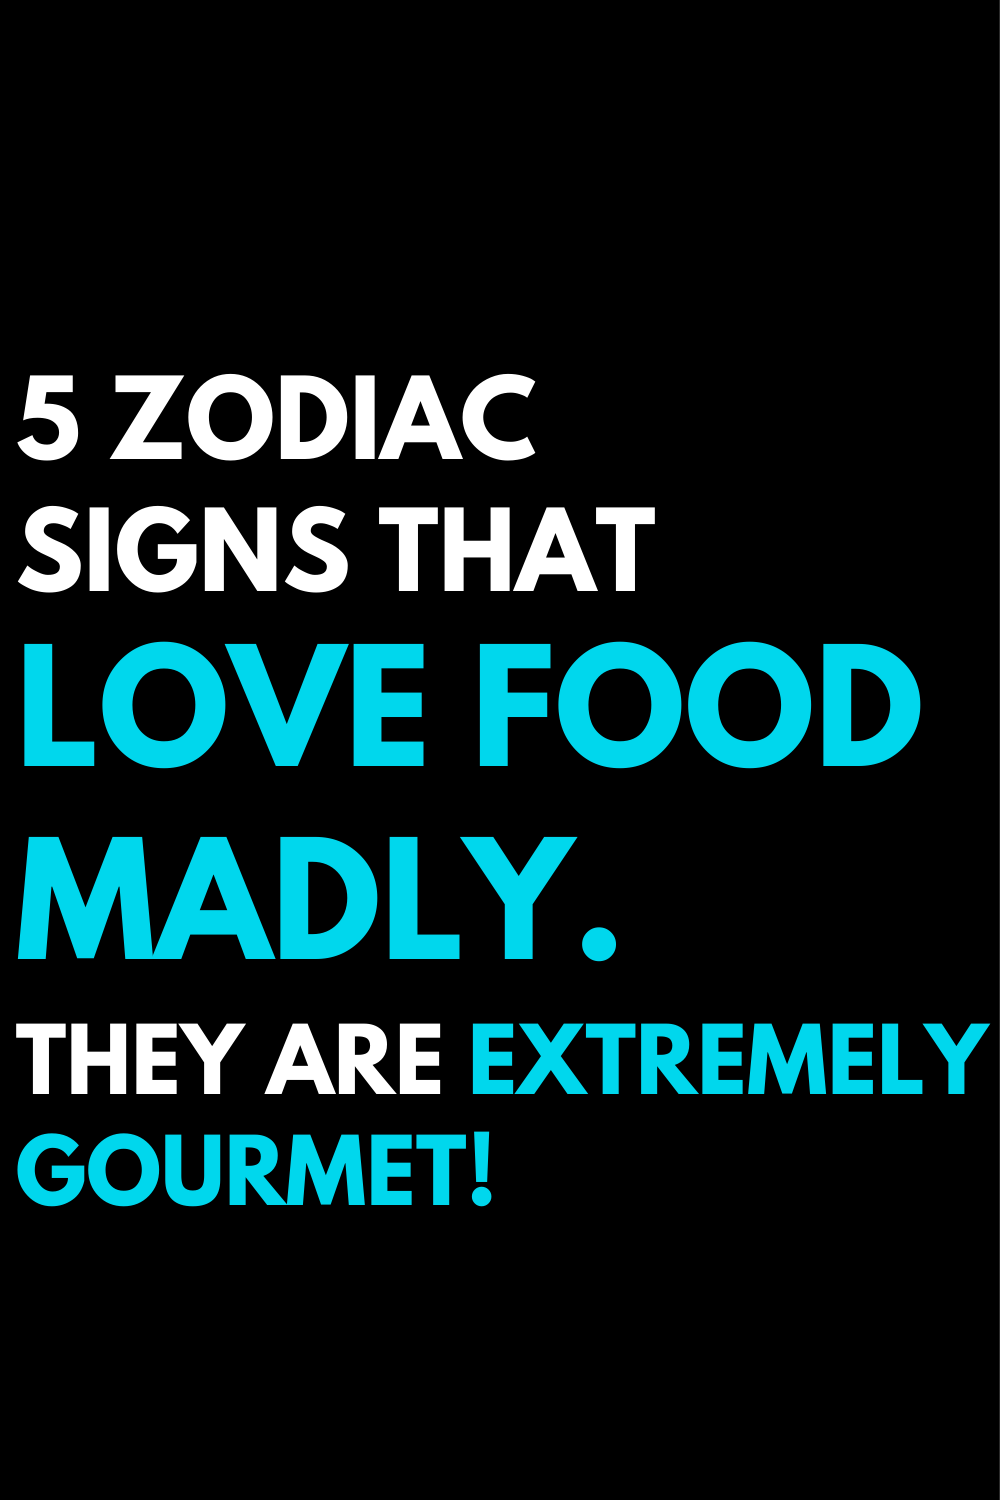 5 zodiac signs that love food madly. They are extremely gourmet!